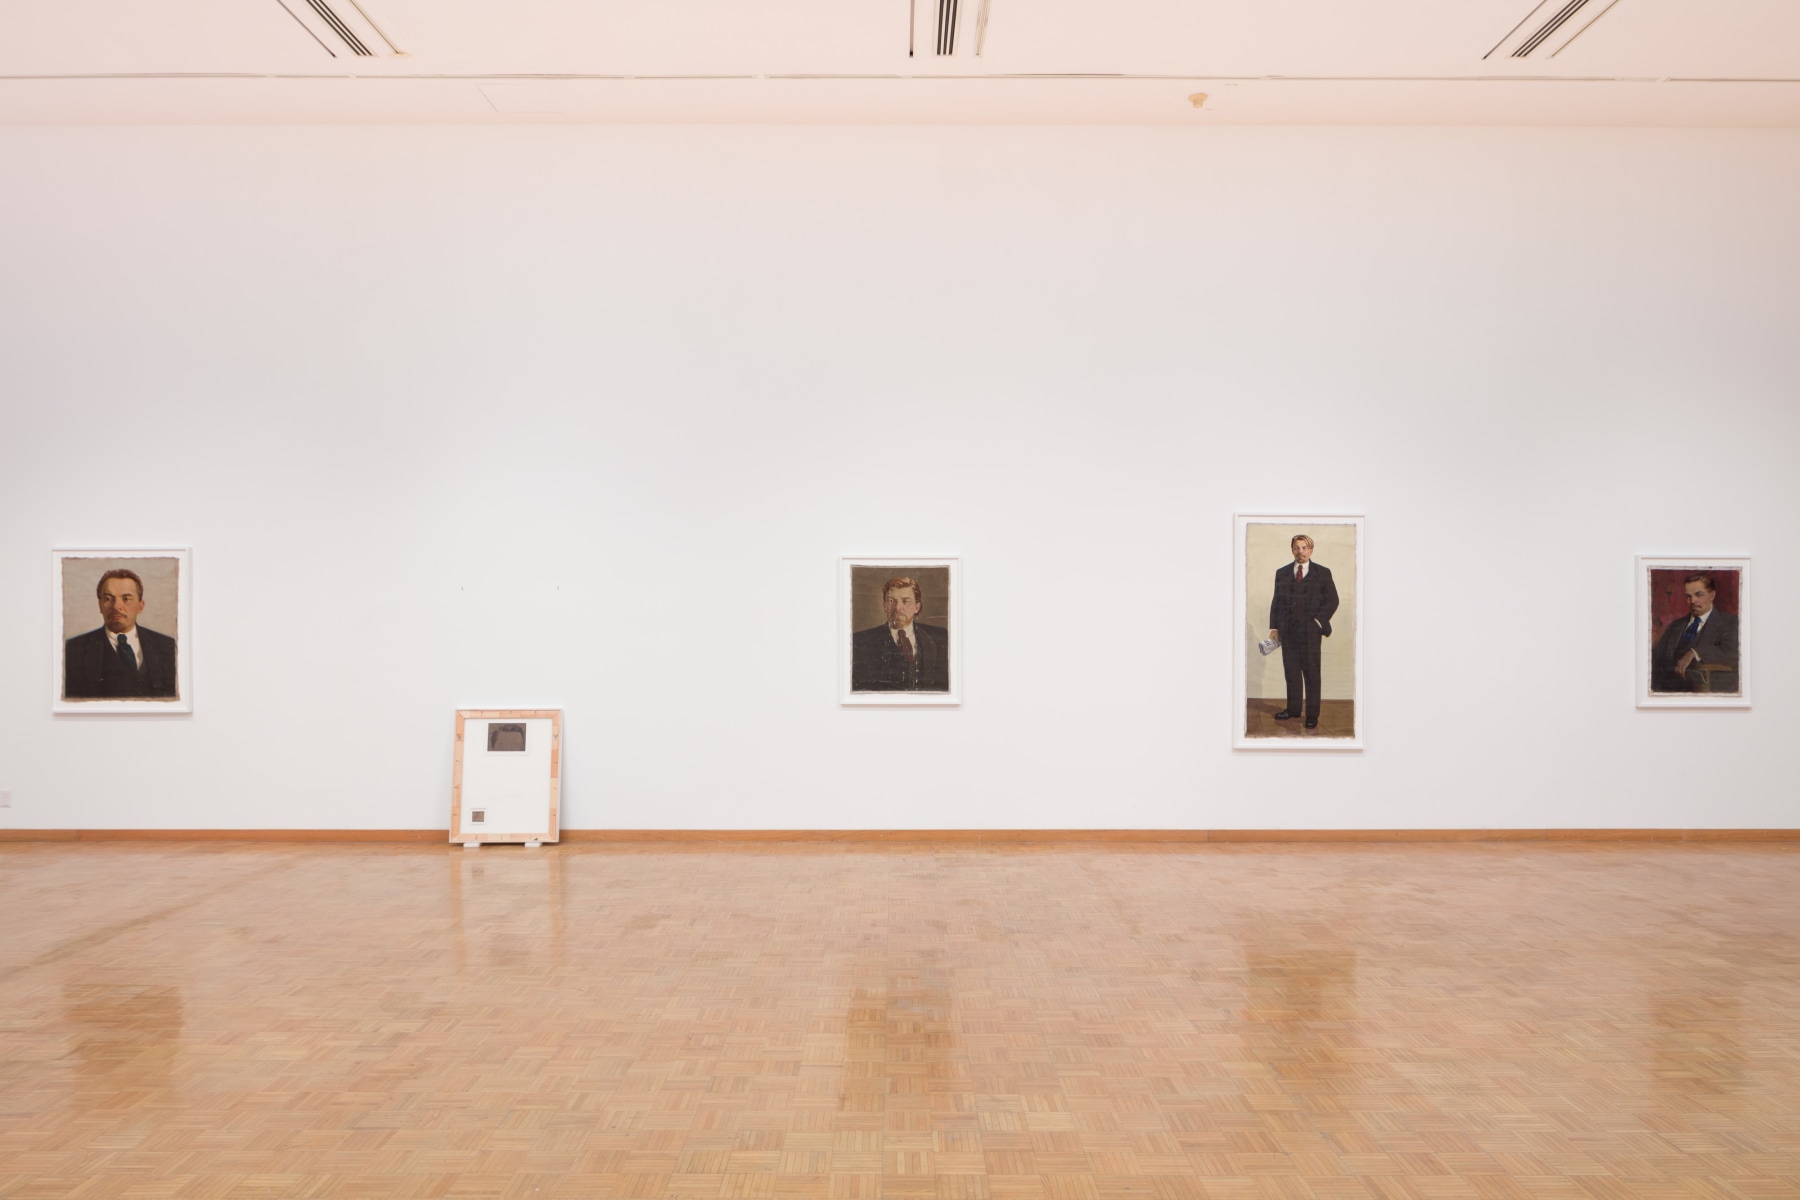 Lenin as..., 2013    Installation view, The Propeller Group, Luckman Gallery, Los Angeles, CA, December 1, 2018 - March 9, 2019